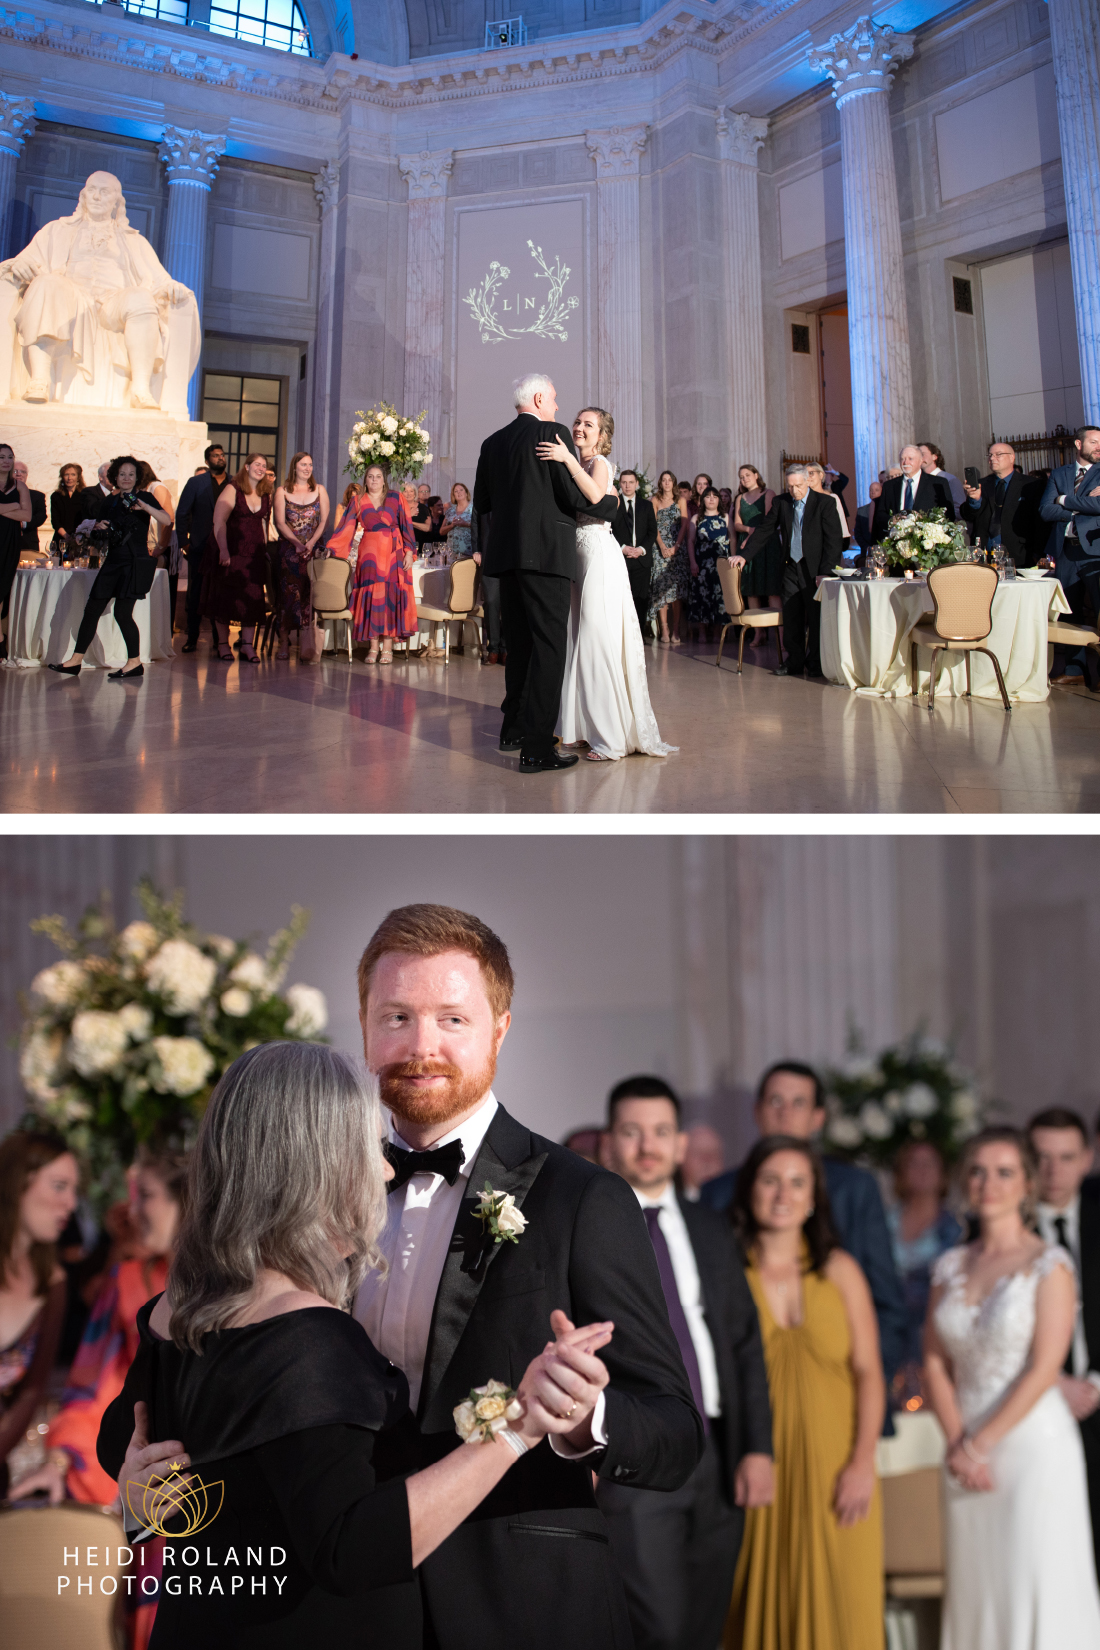 Father daughter and mother son dances at Franklin Institute wedding